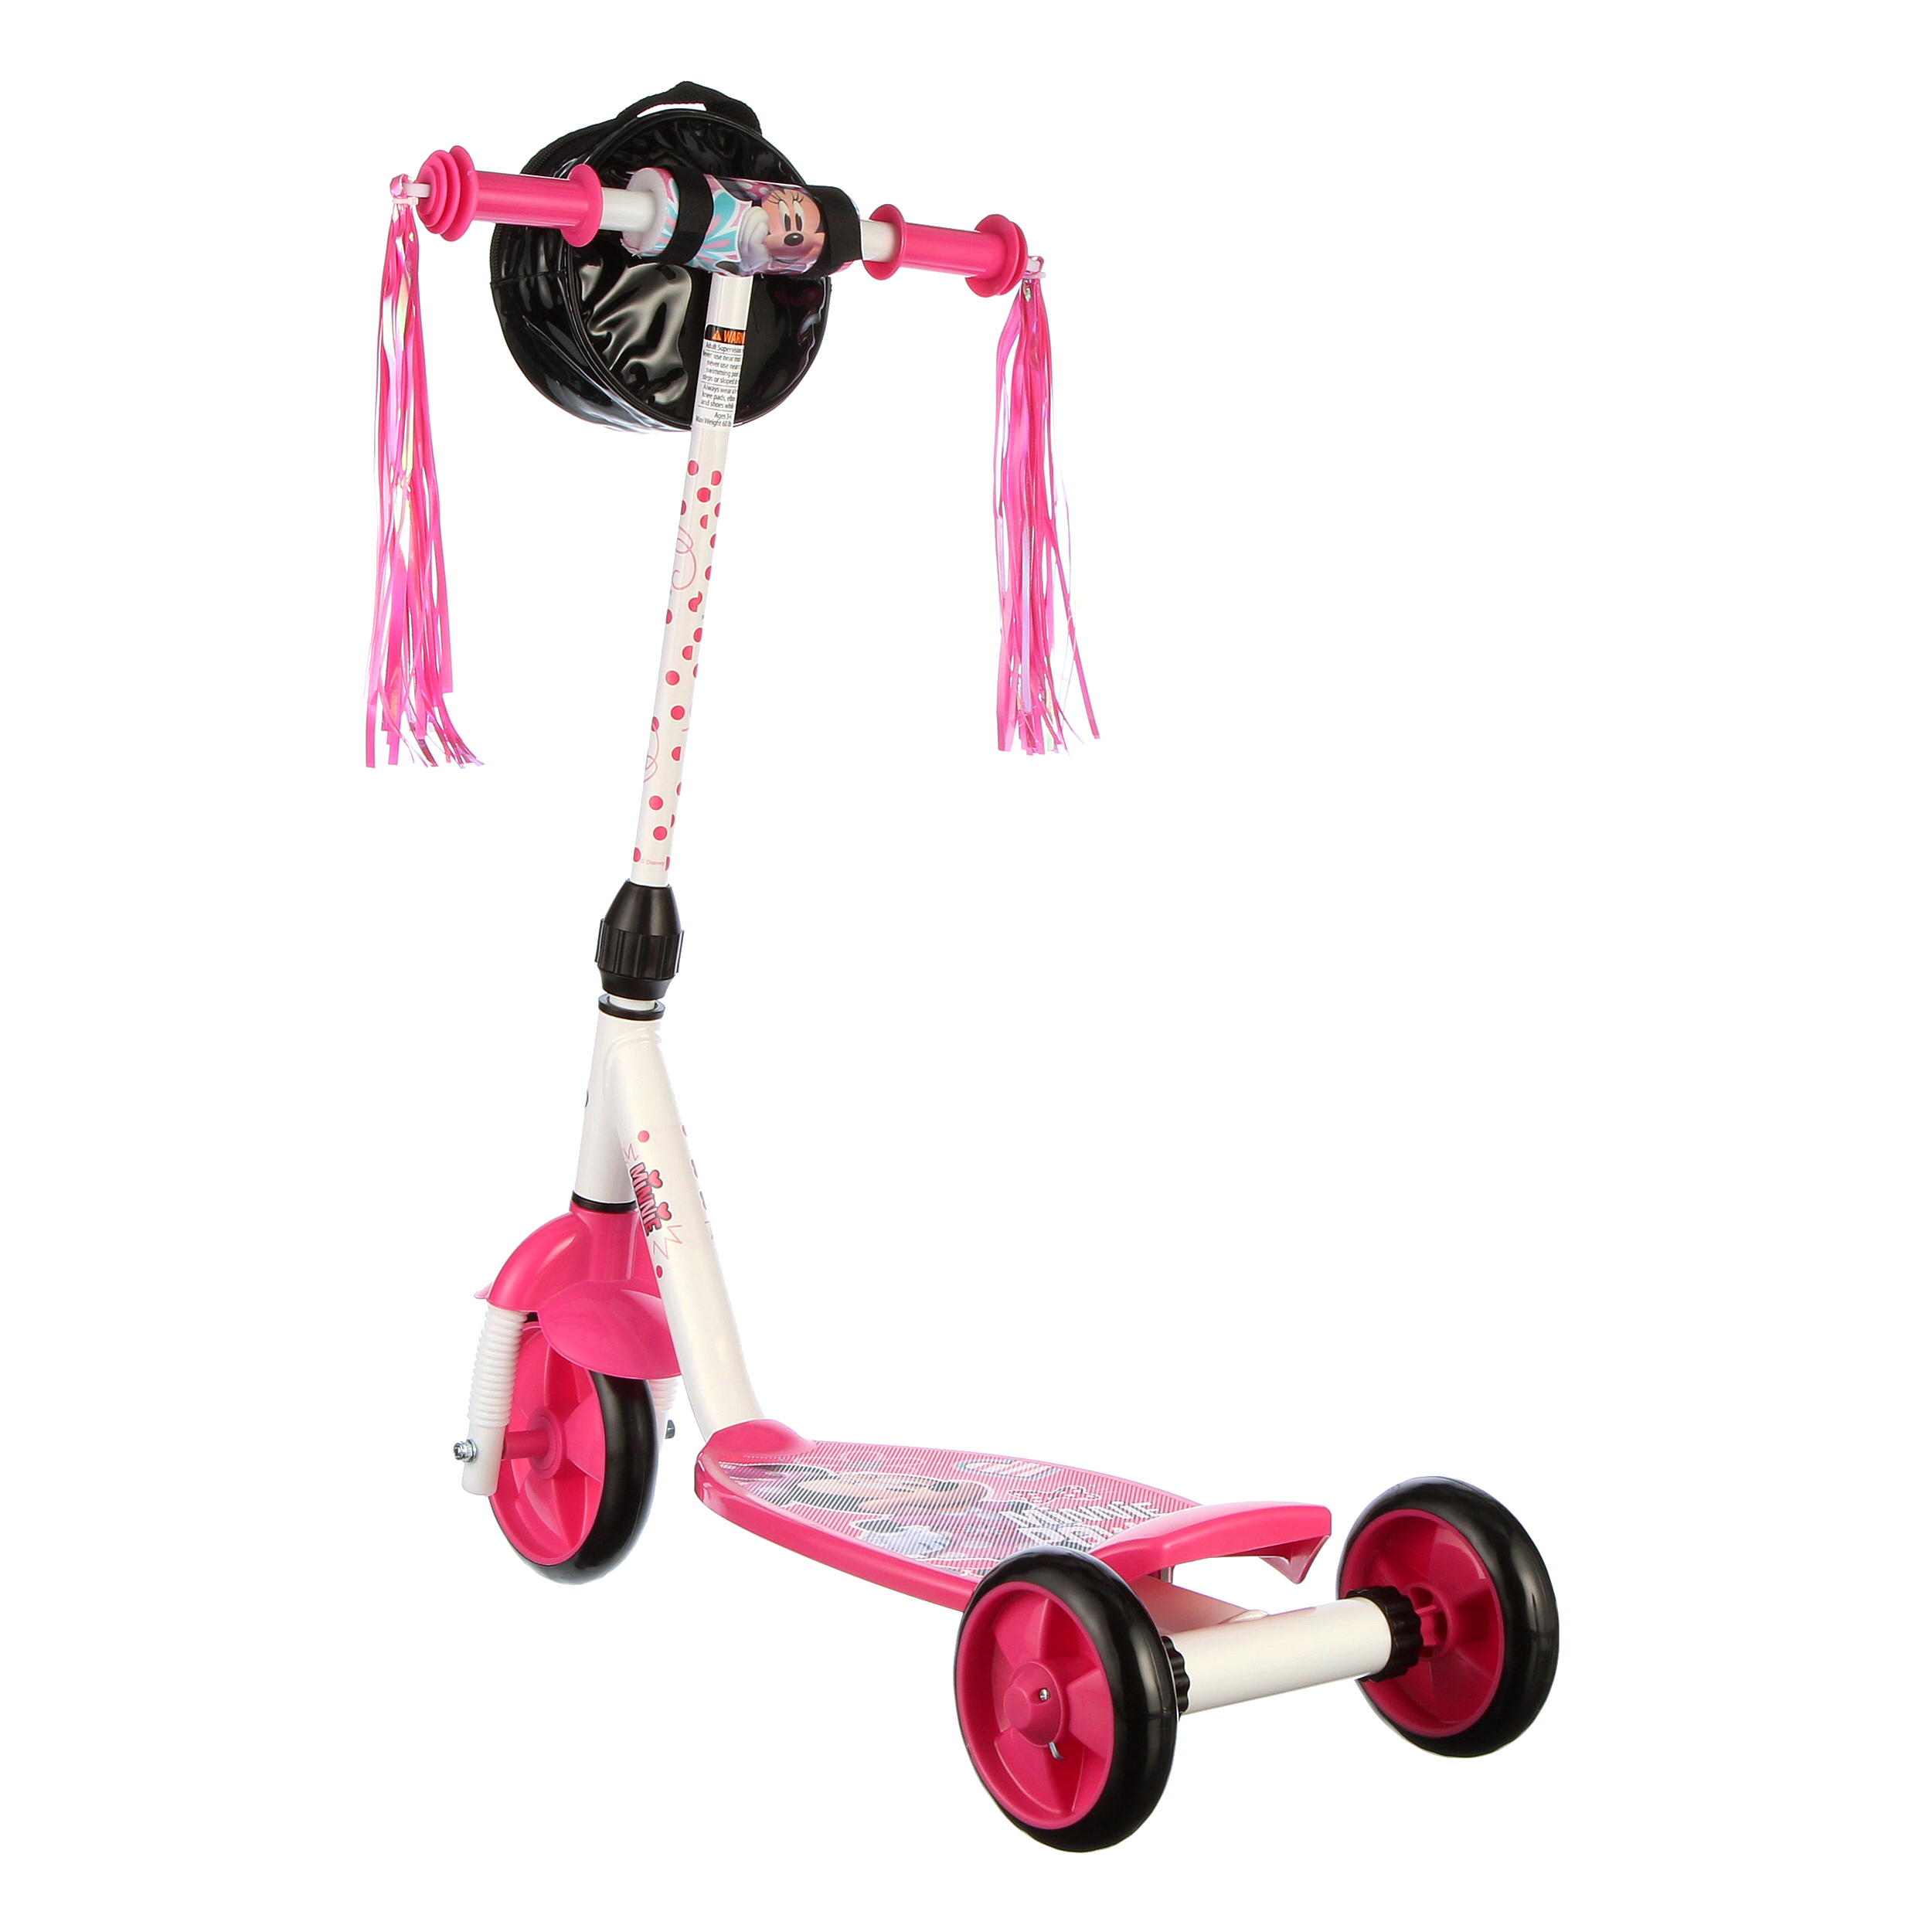 Disney Minnie 3 Wheel Preschool Scooter for Girls by Huffy - image 5 of 5